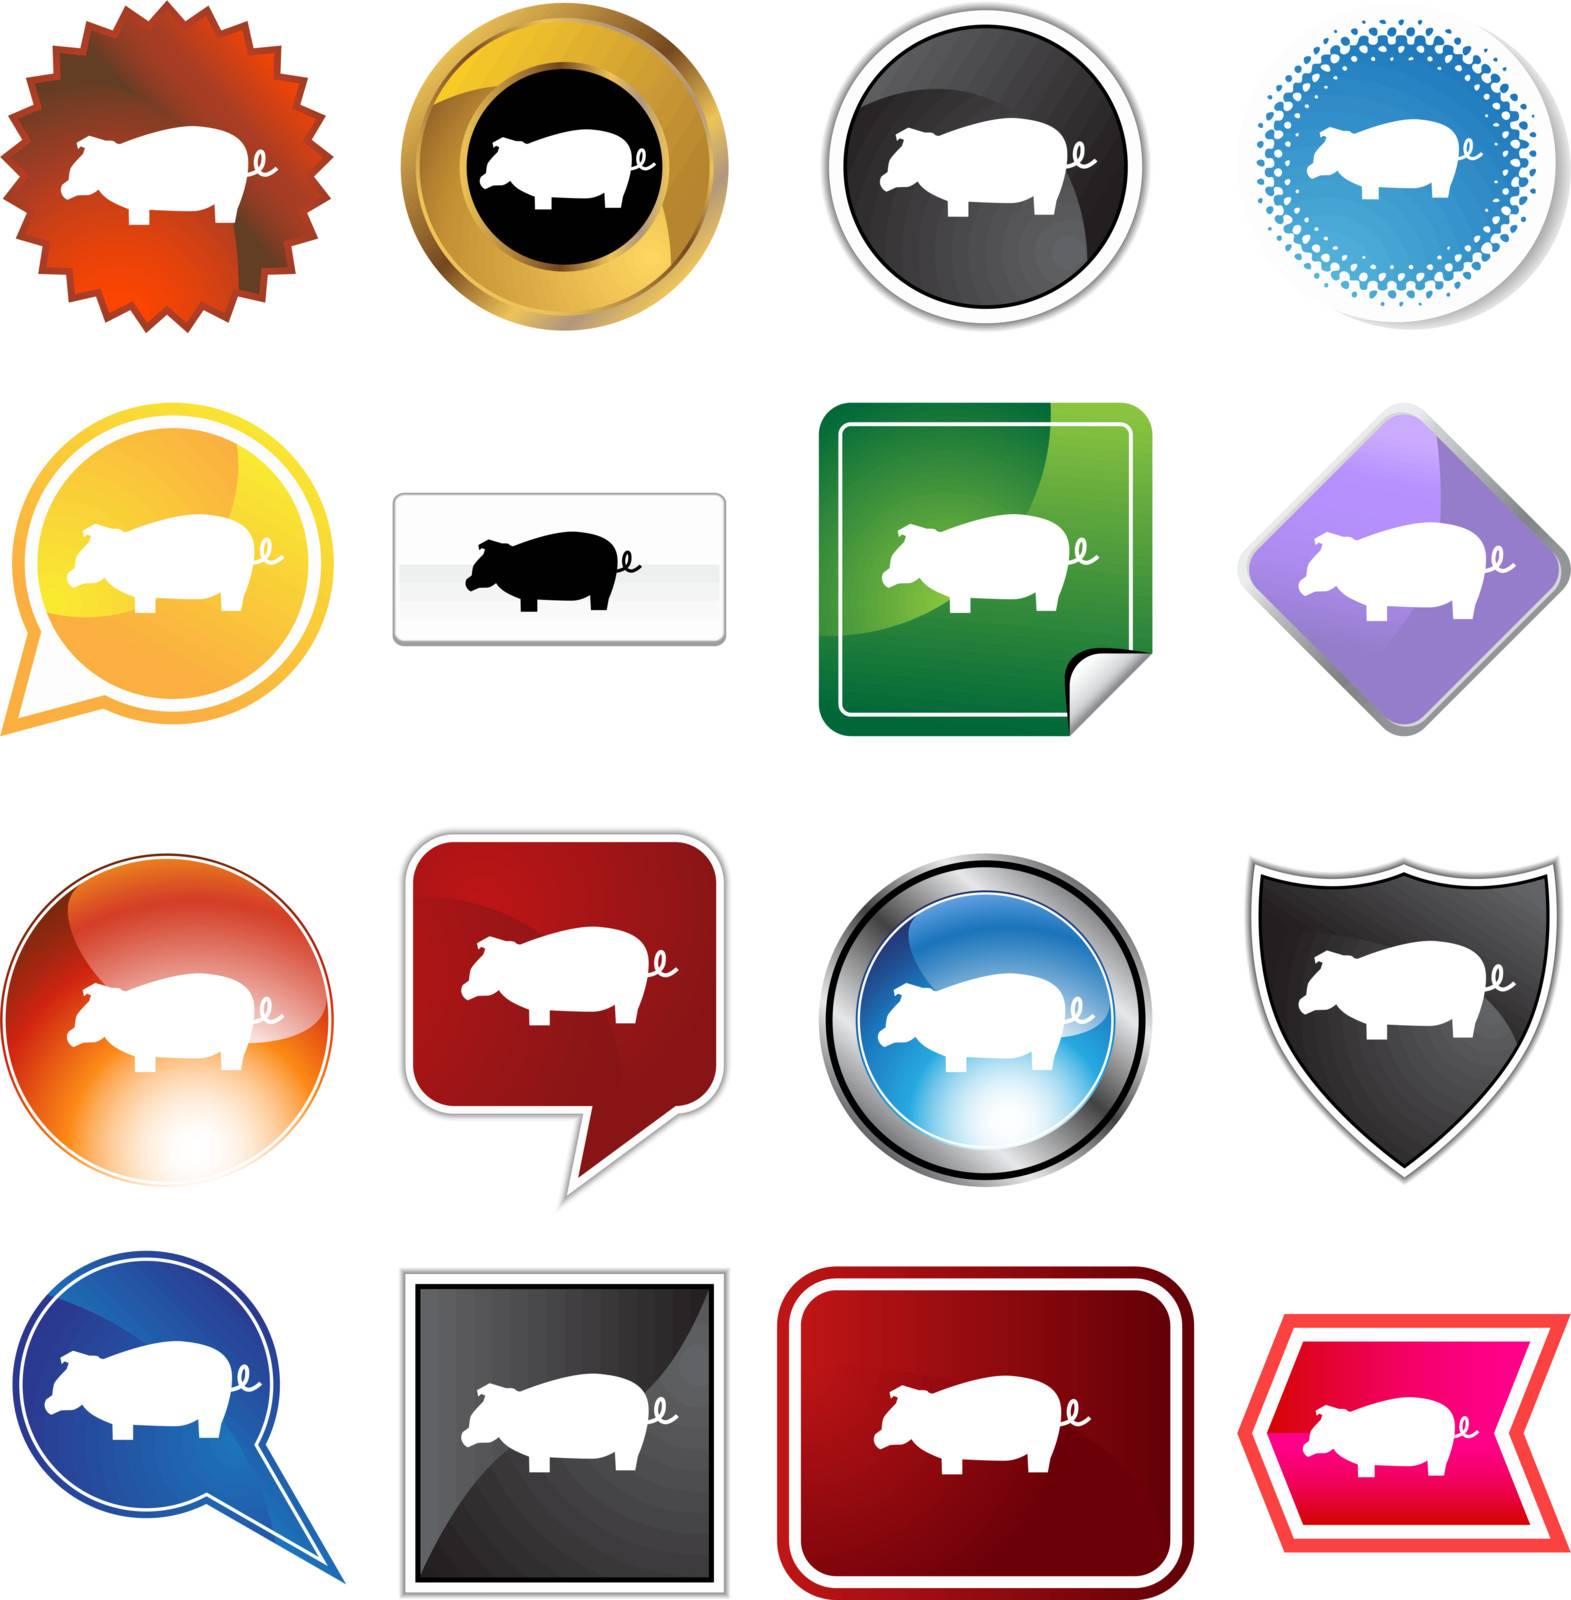 Pig variety set isolated on a white background.